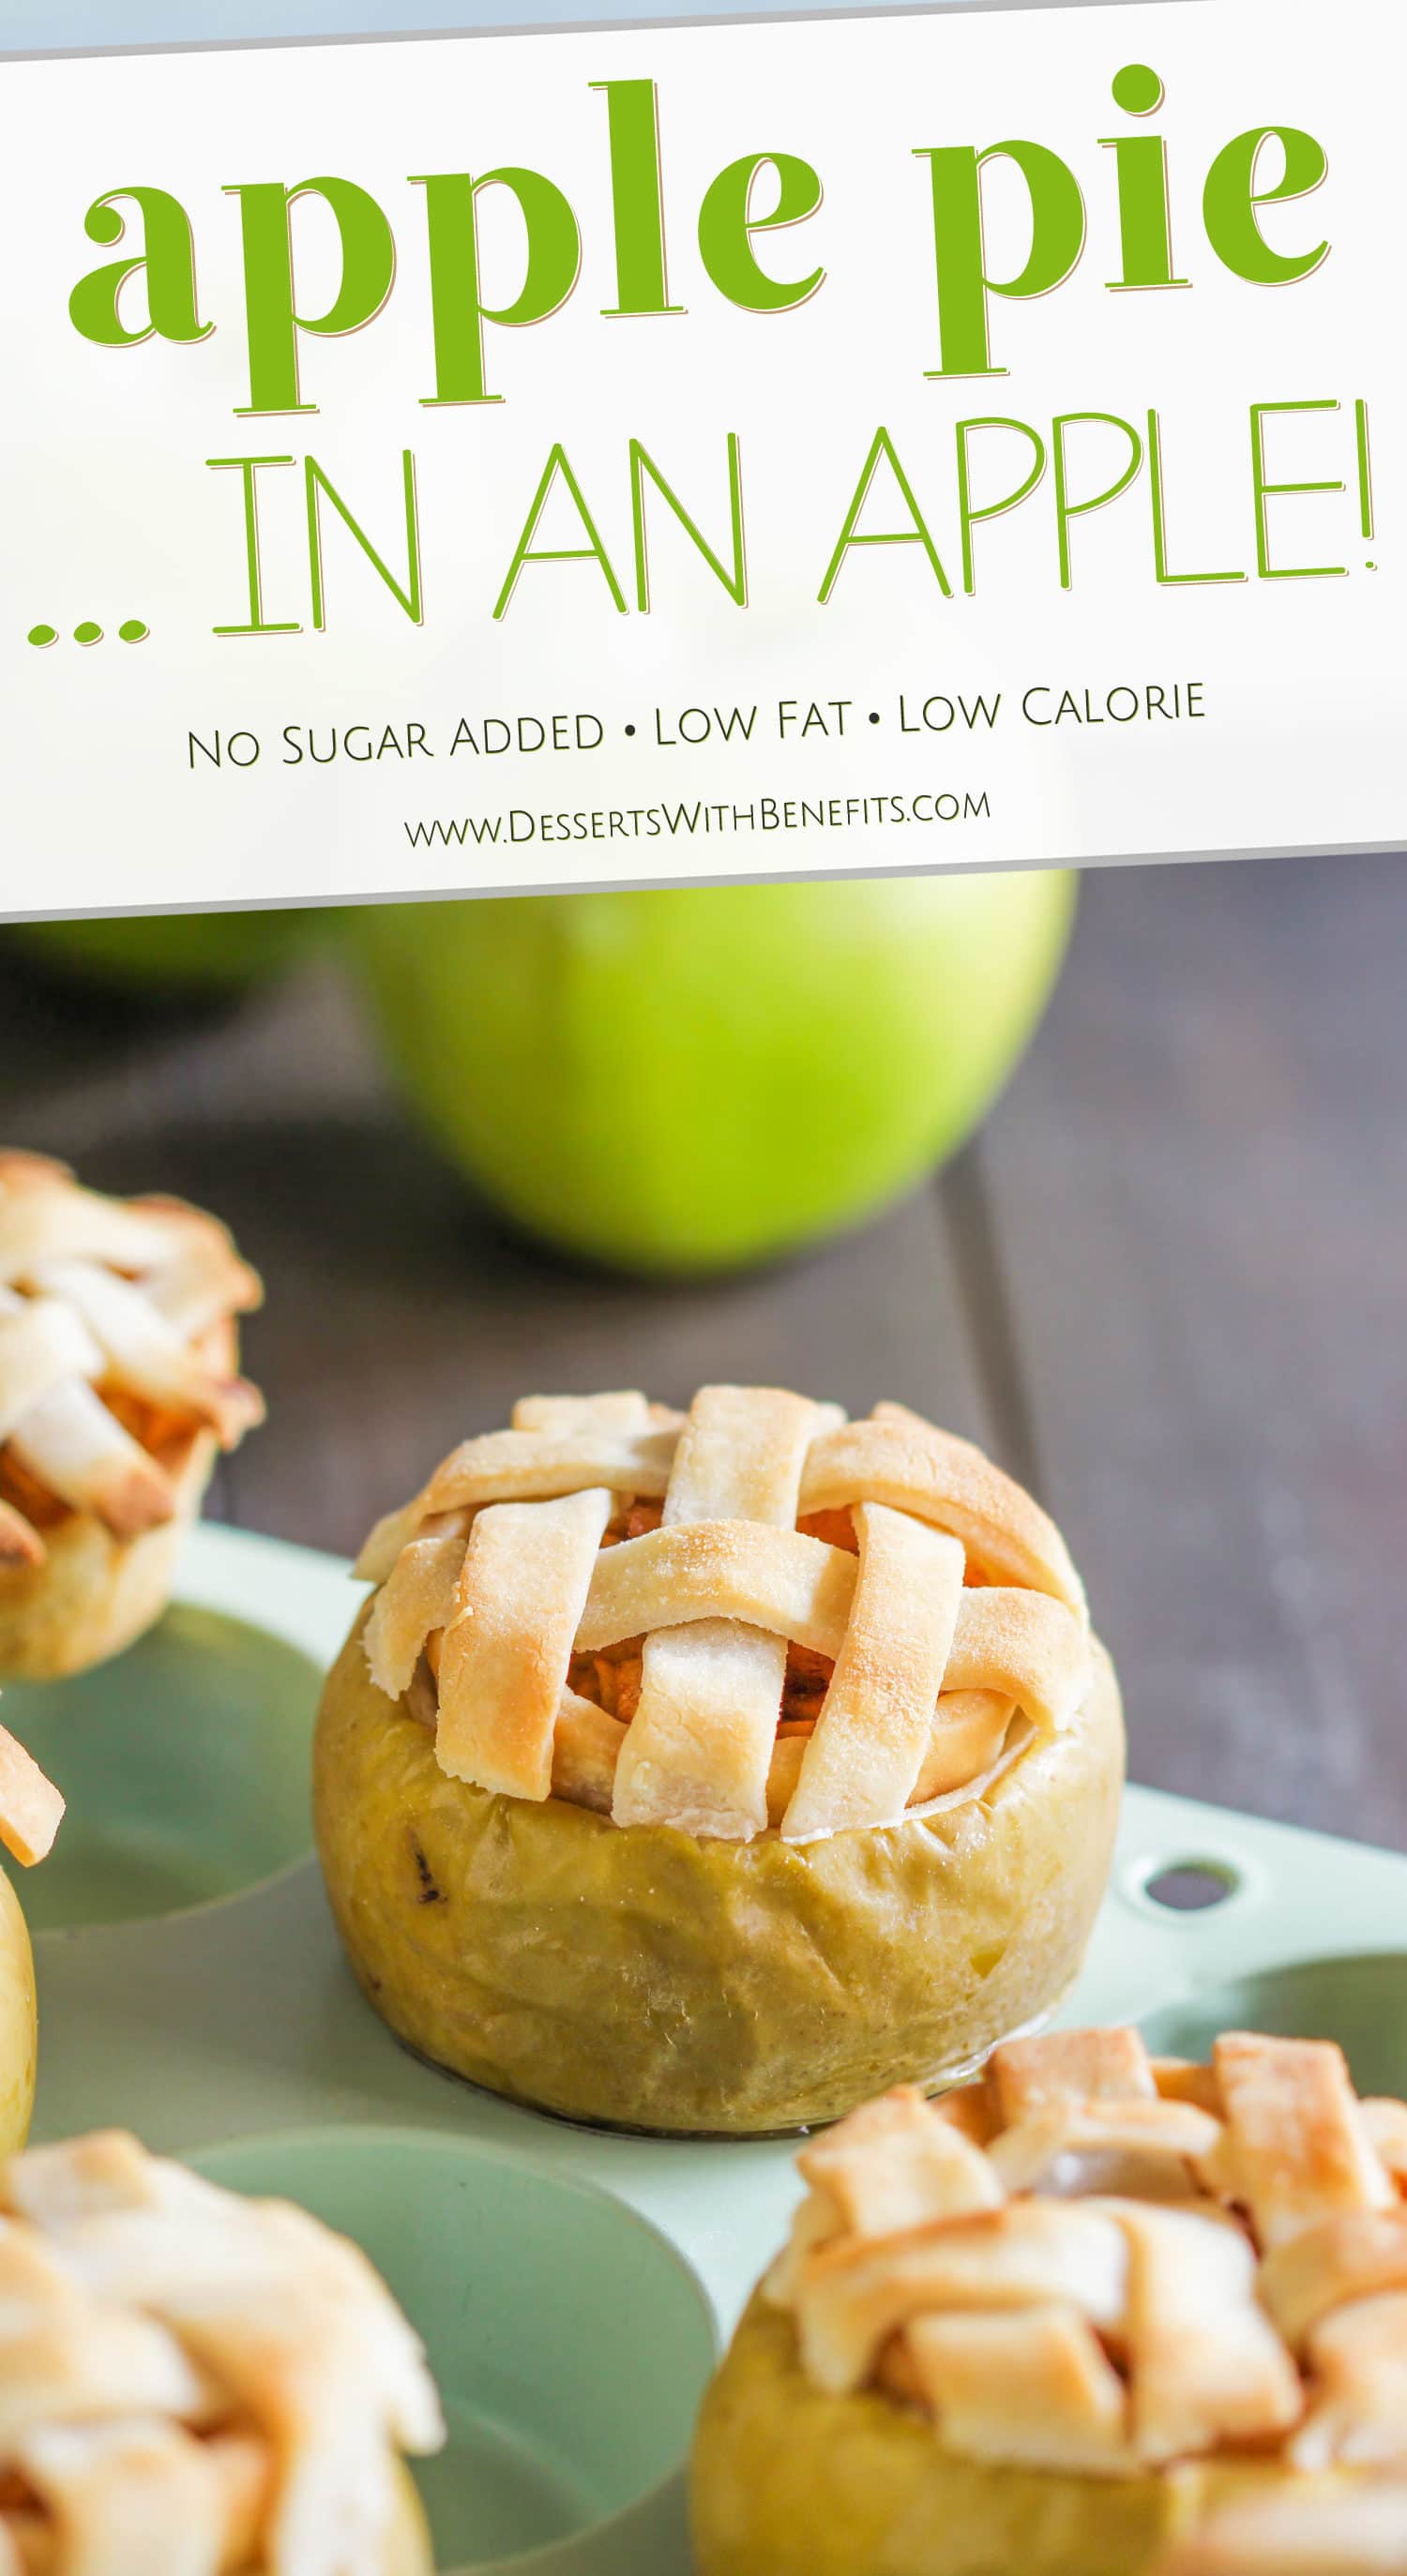 Looking for a unique healthy apple pie recipe? No need for fancy pie dishes here, all you need are the apples themselves! These Healthy Apple Pies are served IN THE APPLE! They’re so adorable and creative, you’ll be sure to WOW everyone you serve these to. And the kicker? They’re low fat and vegan with no sugar added. Healthy Dessert Recipes at the Desserts With Benefits Blog (www.DessertsWithBenefits.com)